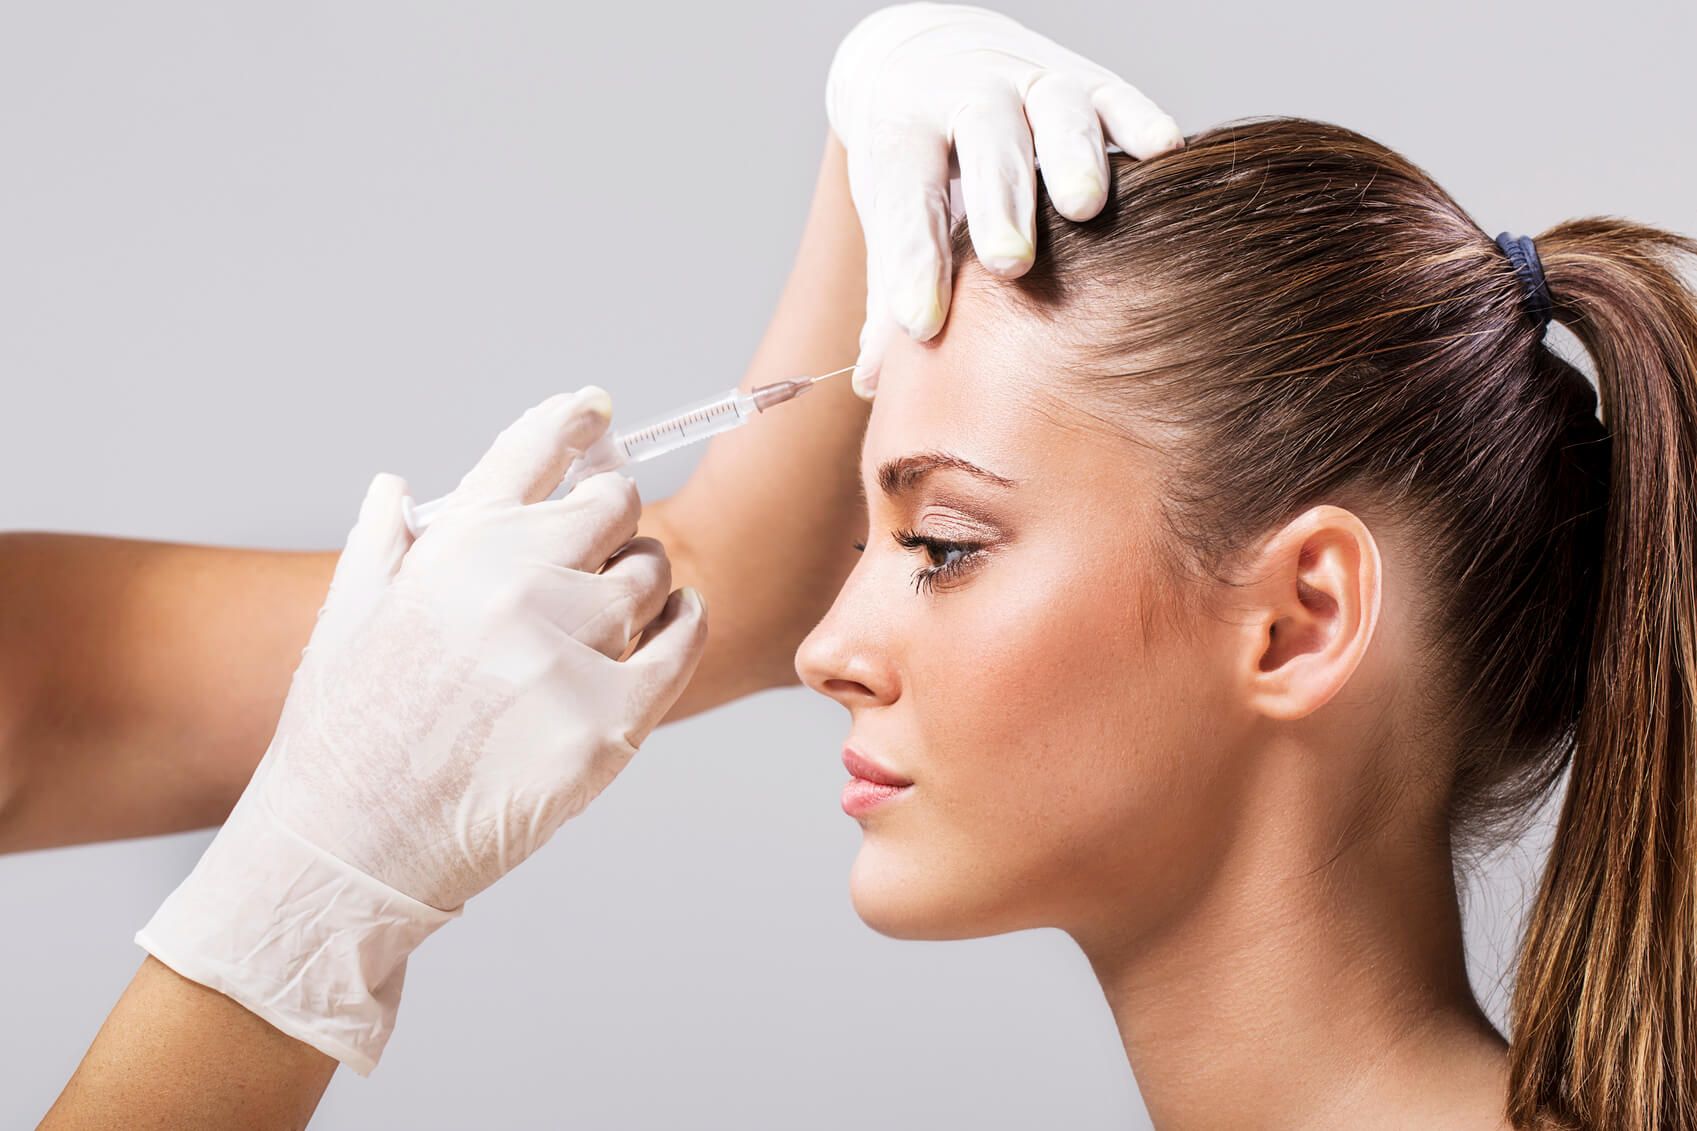 what to avoid after botox injection